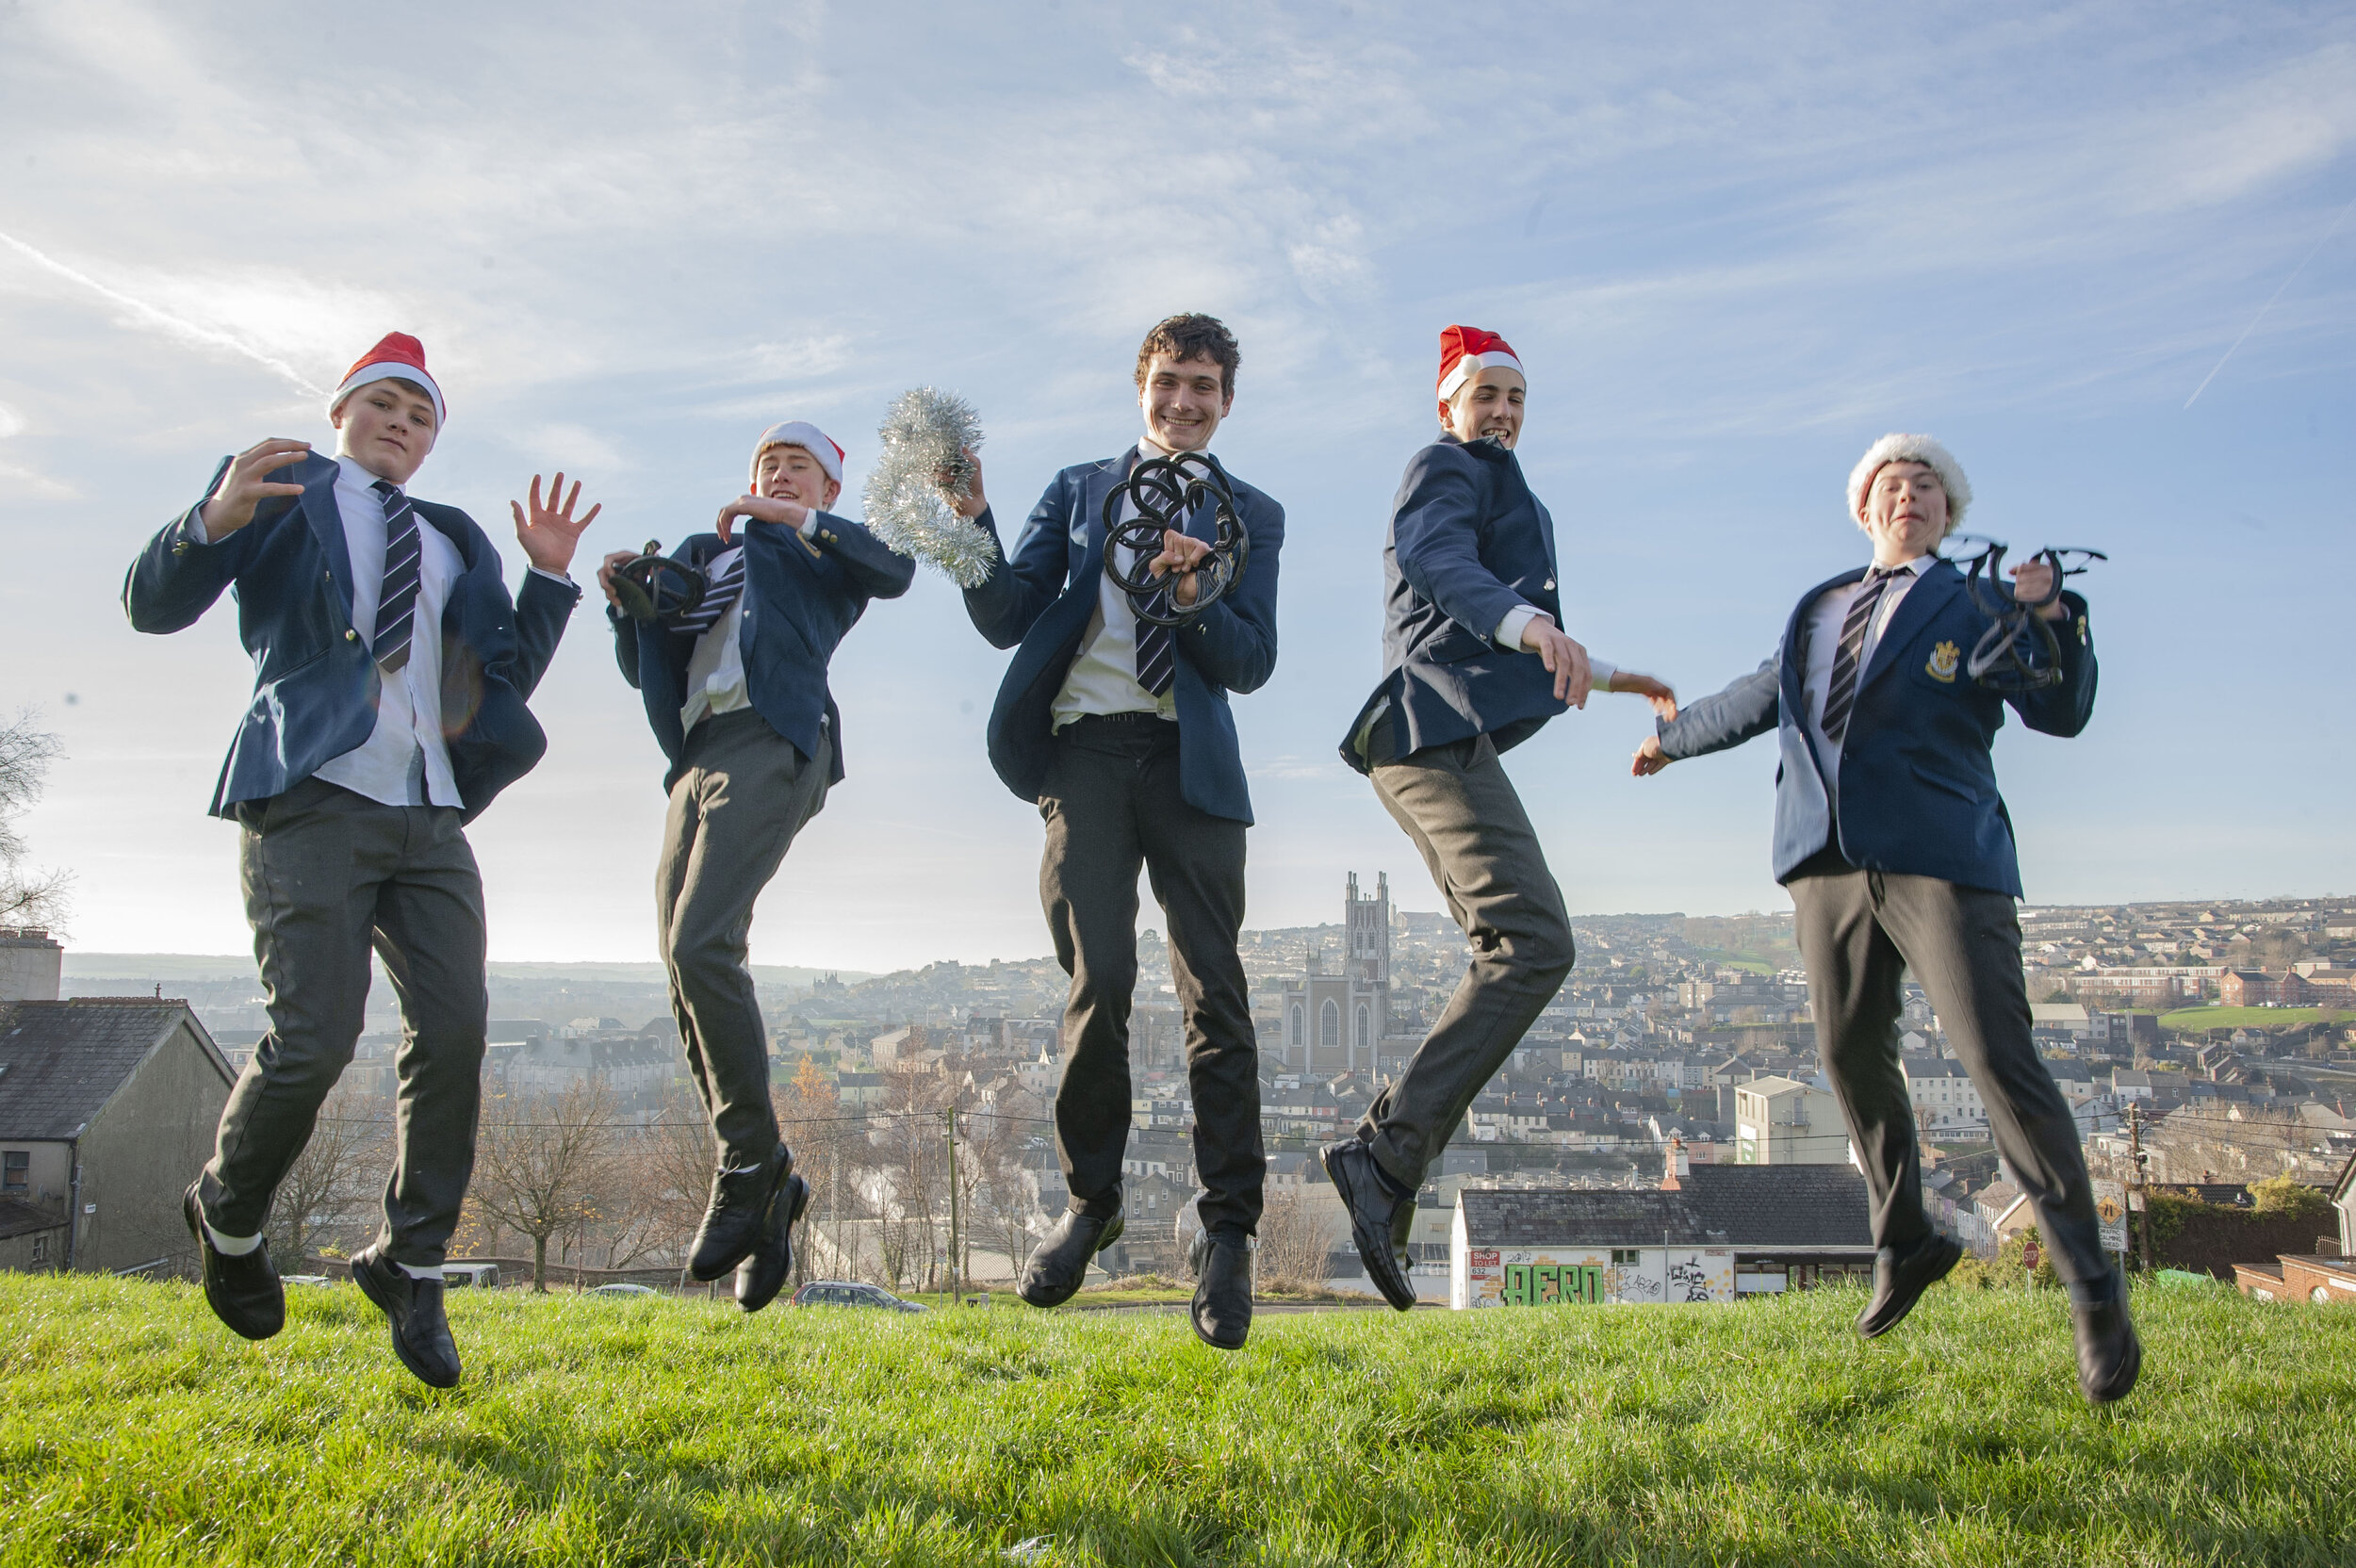  FREE PIC - NO REPRO FEE - Dec 2, 2019From left: Danny Sheahan, James Cuddigan, Conor Kelleher, Robbie Coughlan and Darren Sheehan from Presentation Sec. School get in some last minute training before the Cork LEO Schools Enterprise Christmas Trade F